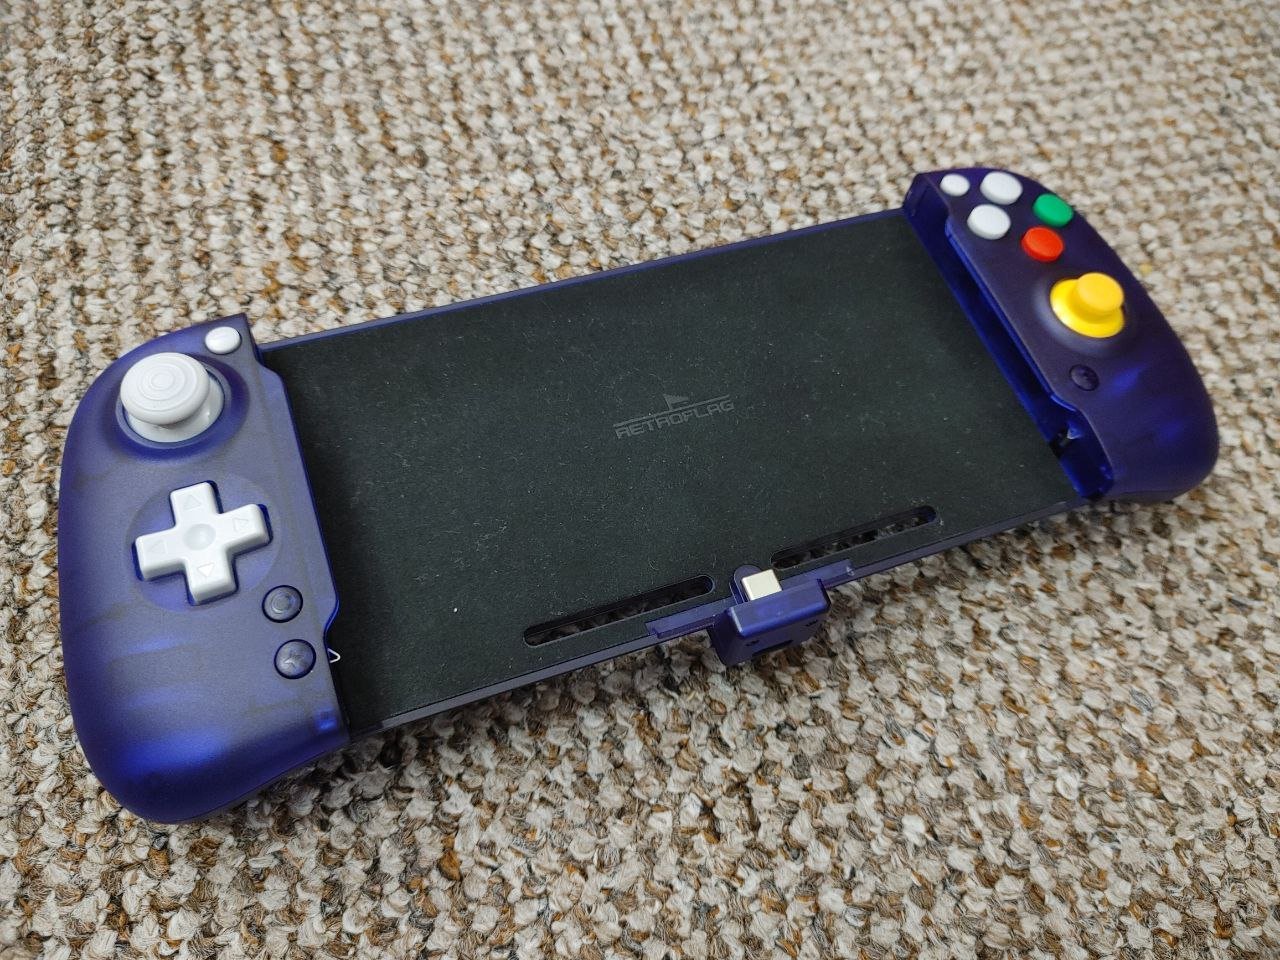 Retroflag Handheld Controller for Switch Review (Hardware) - Official  GBAtemp Review | GBAtemp.net - The Independent Video Game Community